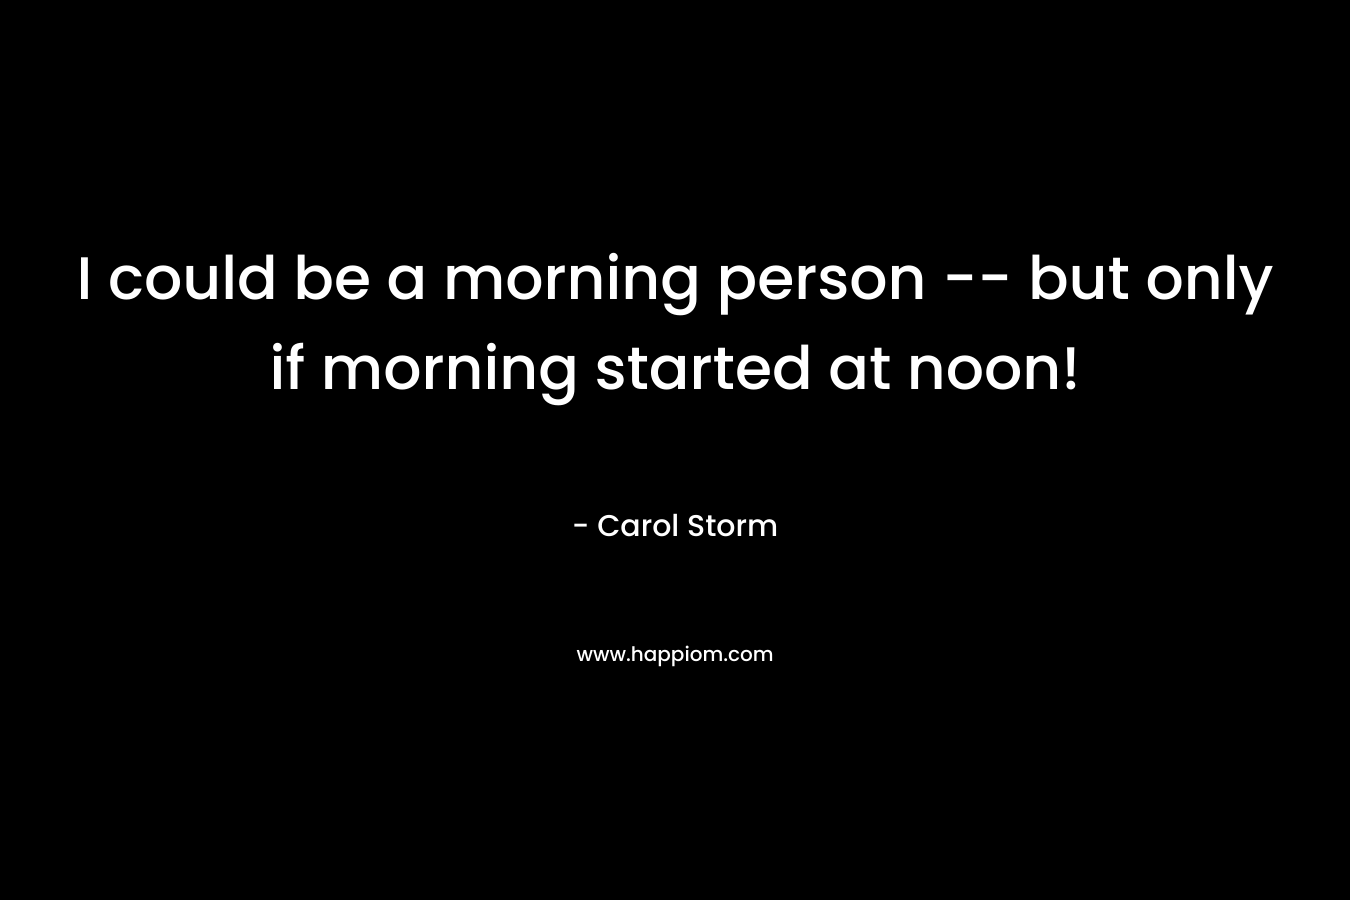 I could be a morning person -- but only if morning started at noon!